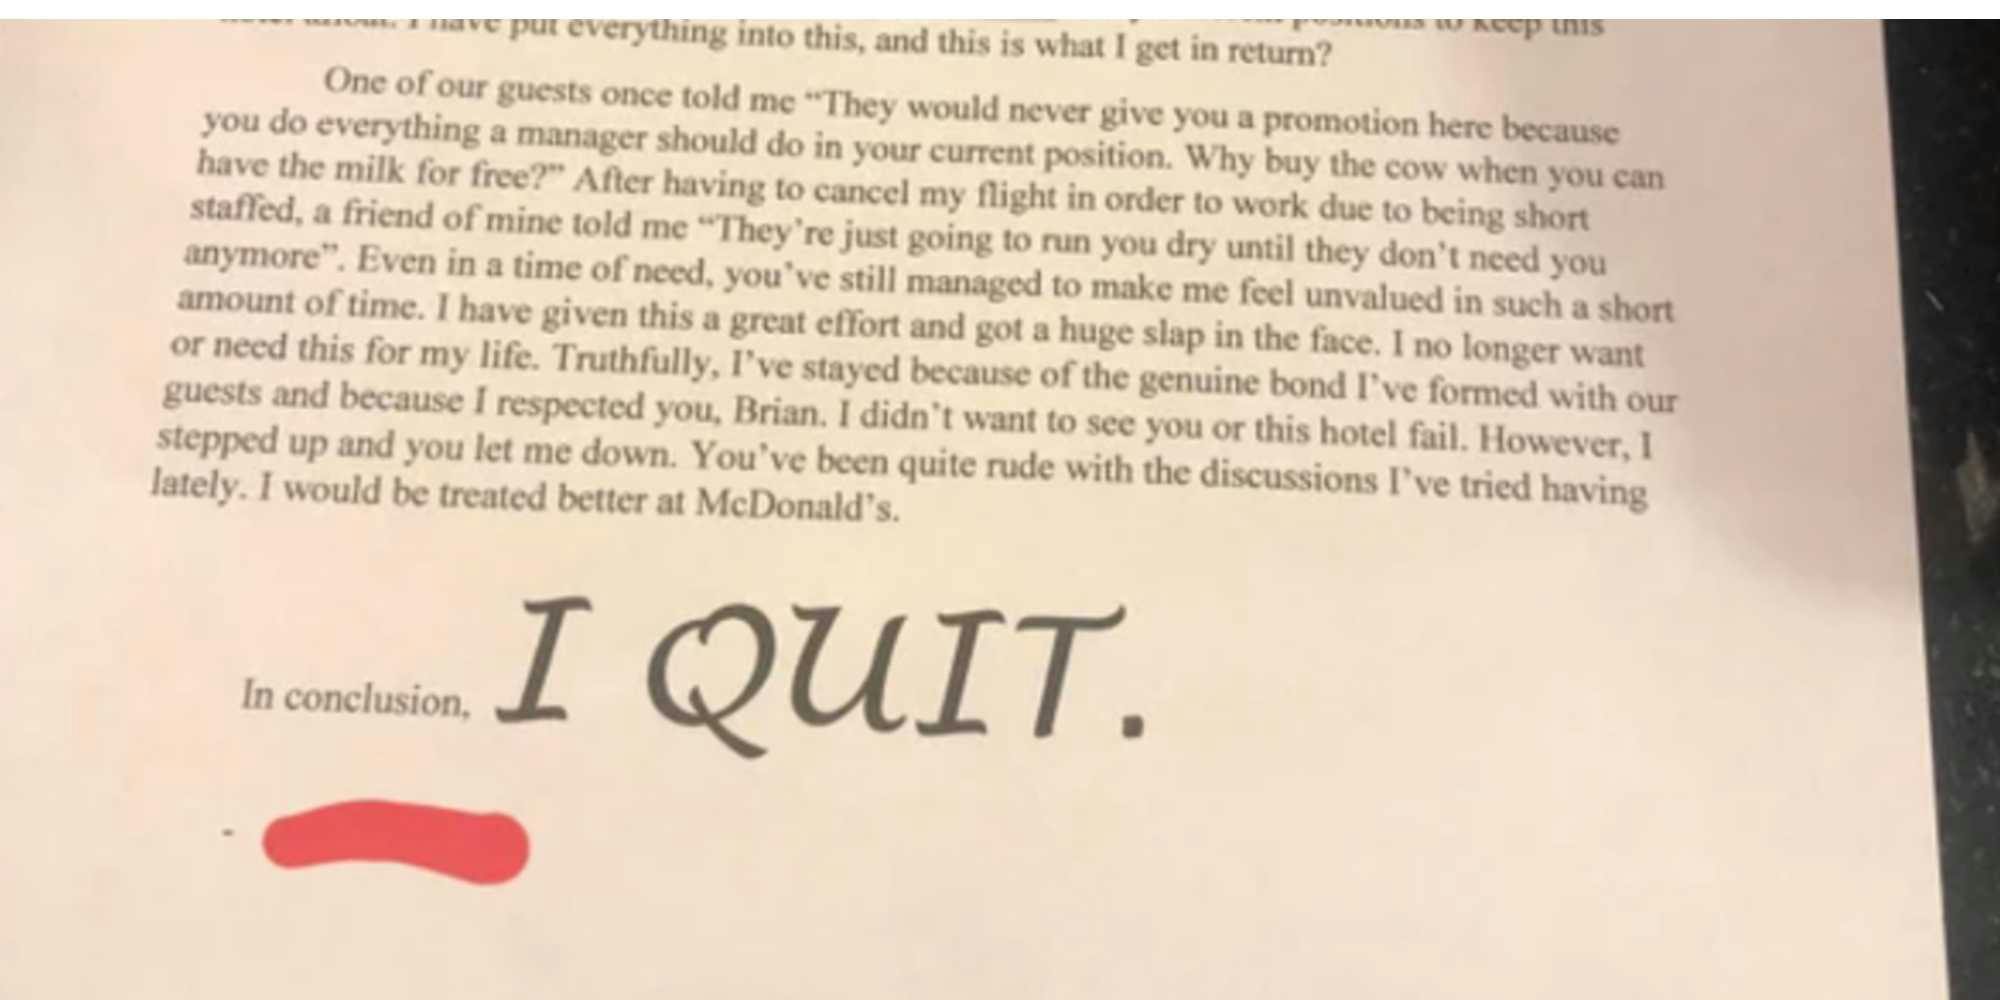 viral quitting letter with all-caps "I QUIT"